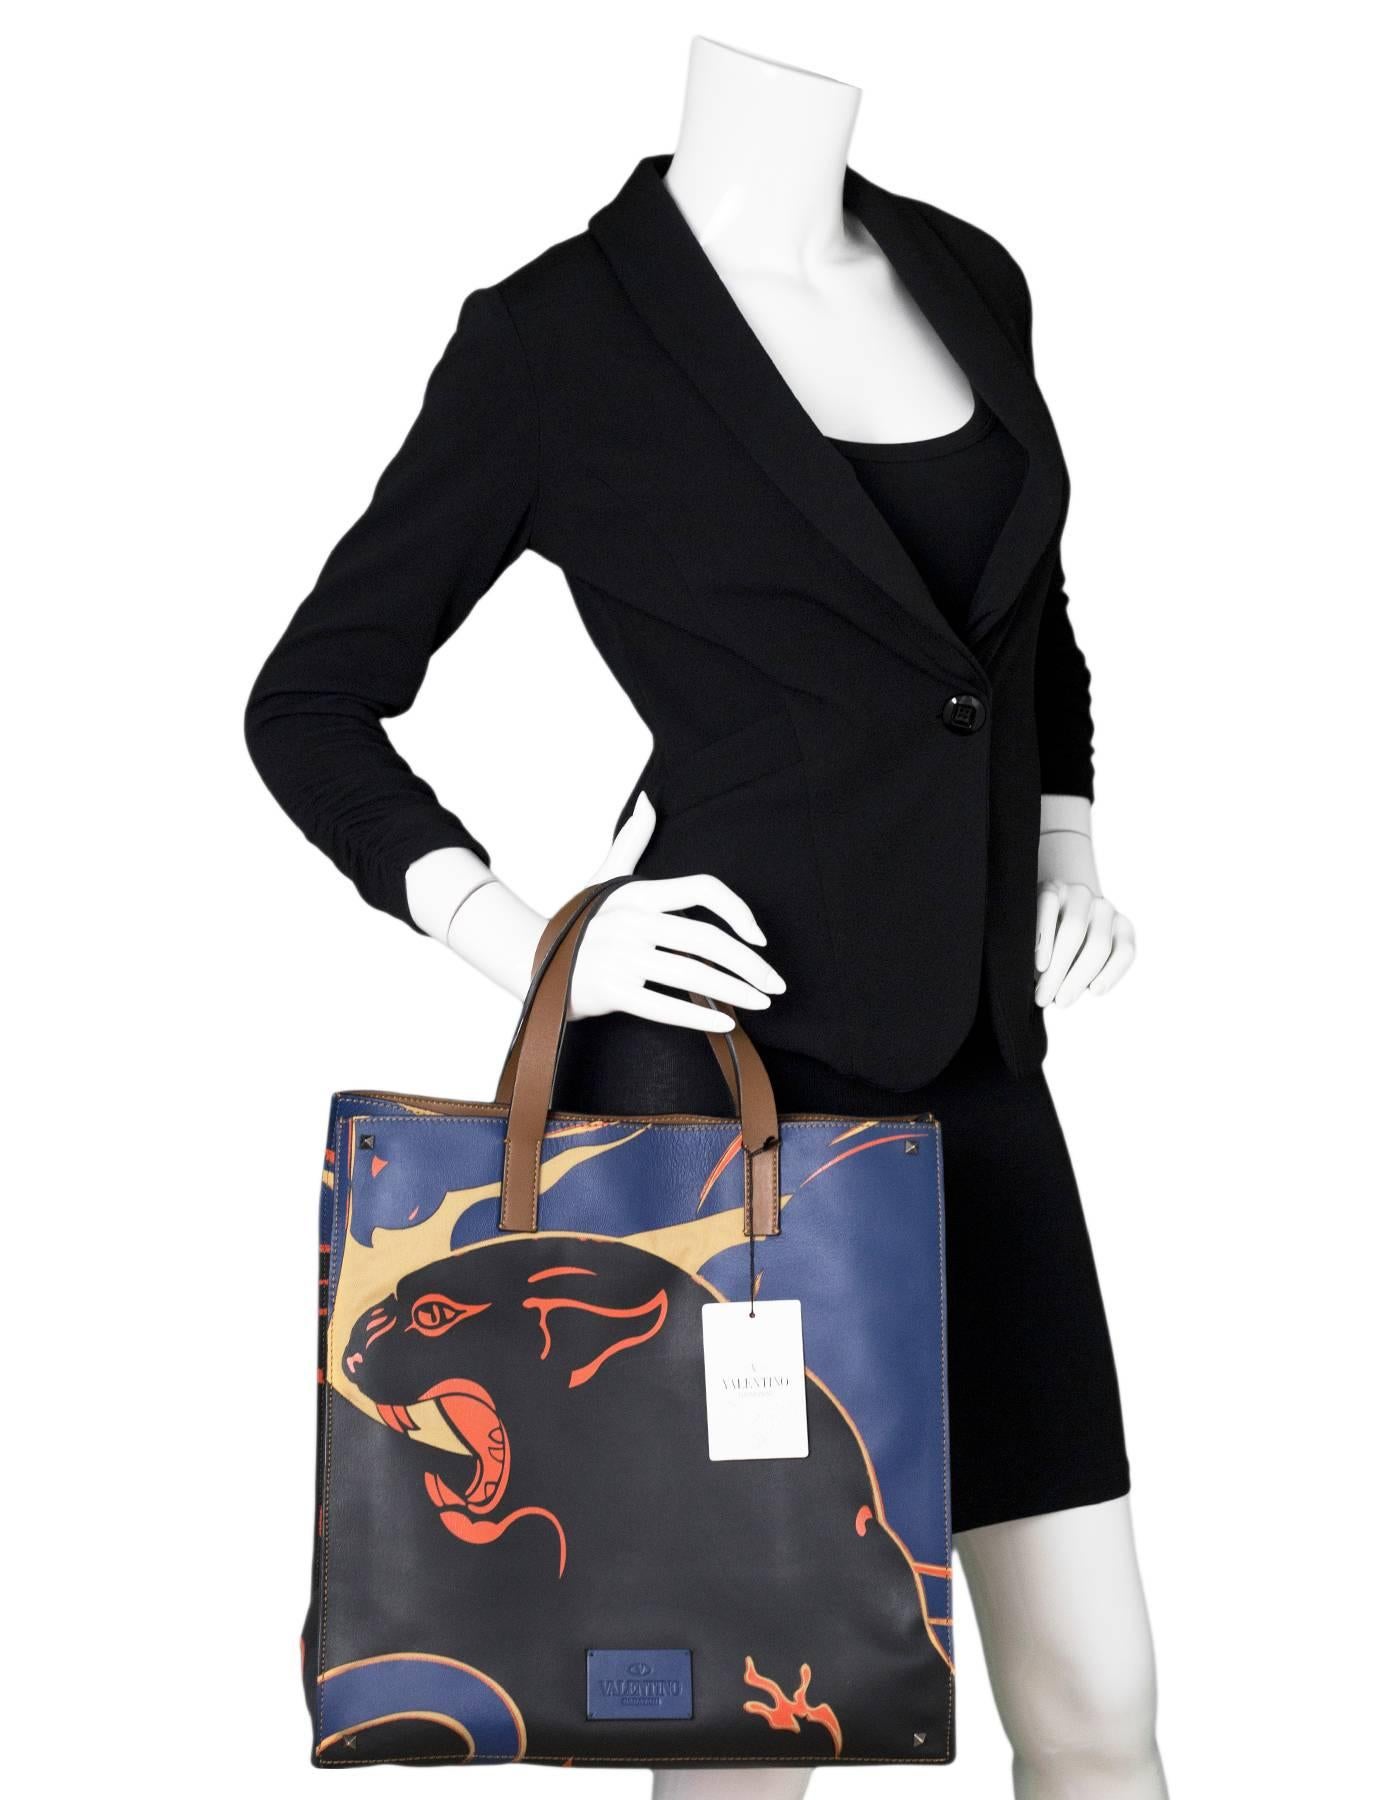 Valentino Navy Leather & Canvas Panther Print Tote

Made In: Italy
Color: Black, navy, orange
Hardware: None
Materials: Leather, canvas
Lining: Brown leather
Closure/Opening: Open top with center snap
Exterior Pockets: None
Interior Pockets: